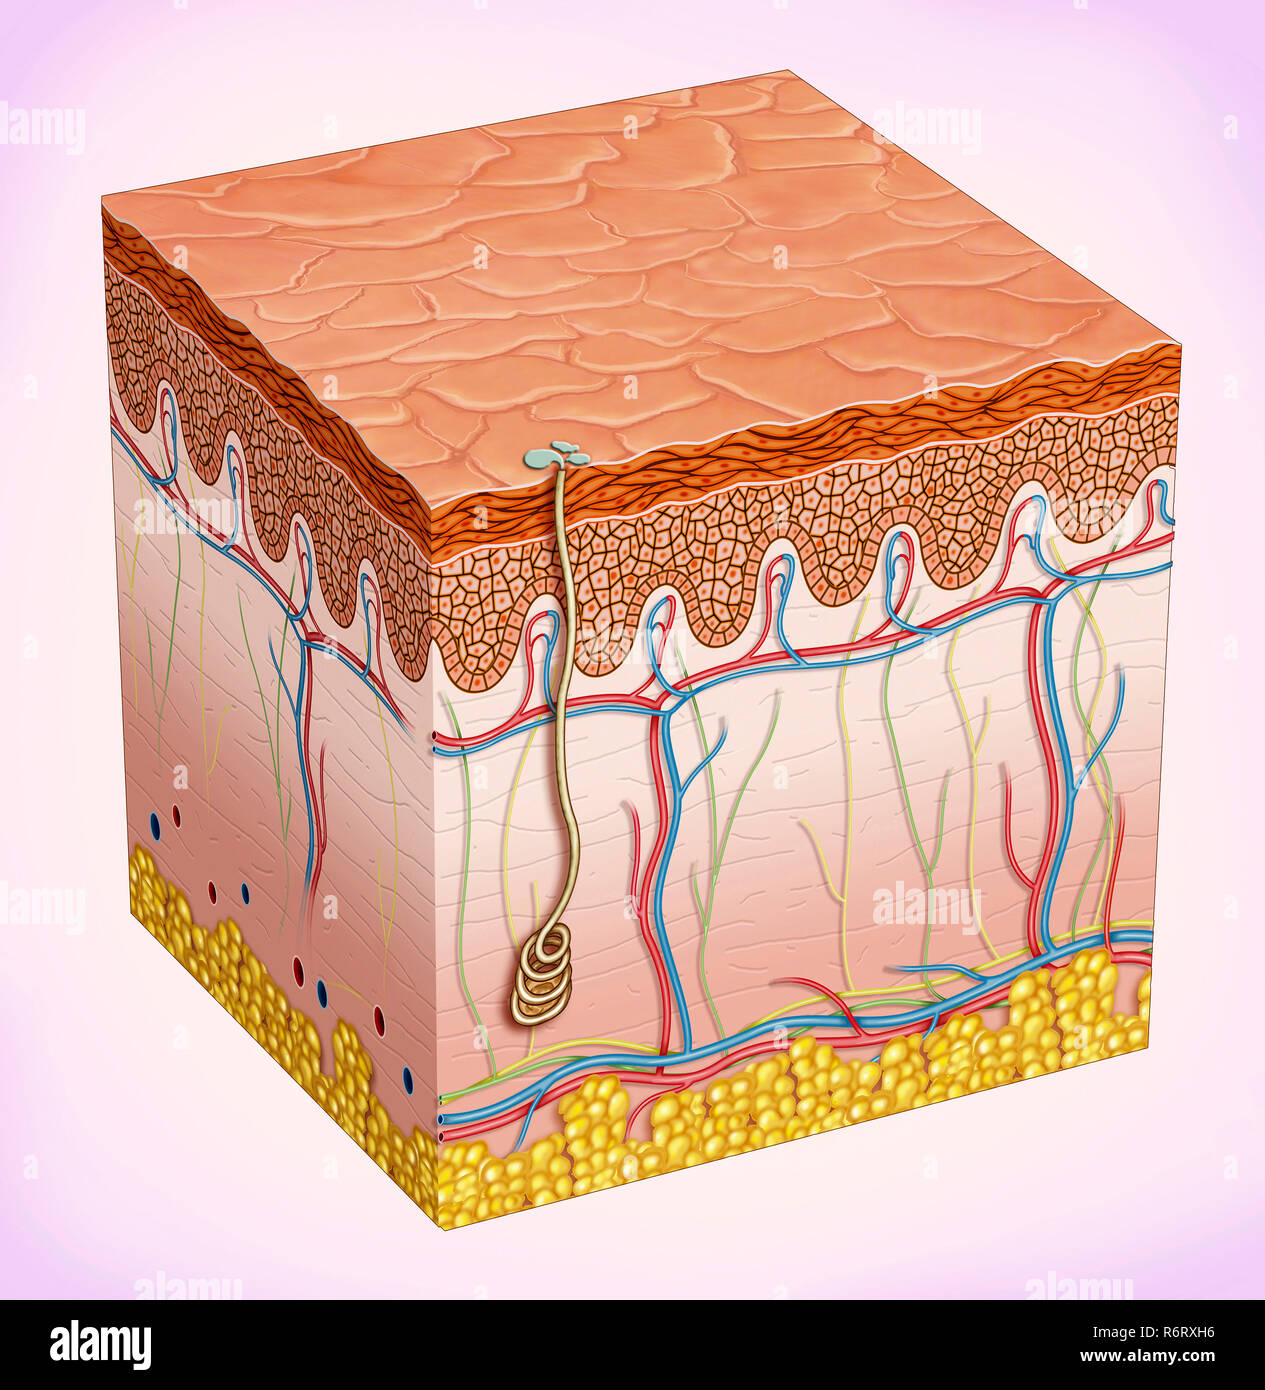 The skin is made up of three layers: epidermis, dermis and subcutaneous tissue. Its function is to protect the body from the environment. Stock Photo